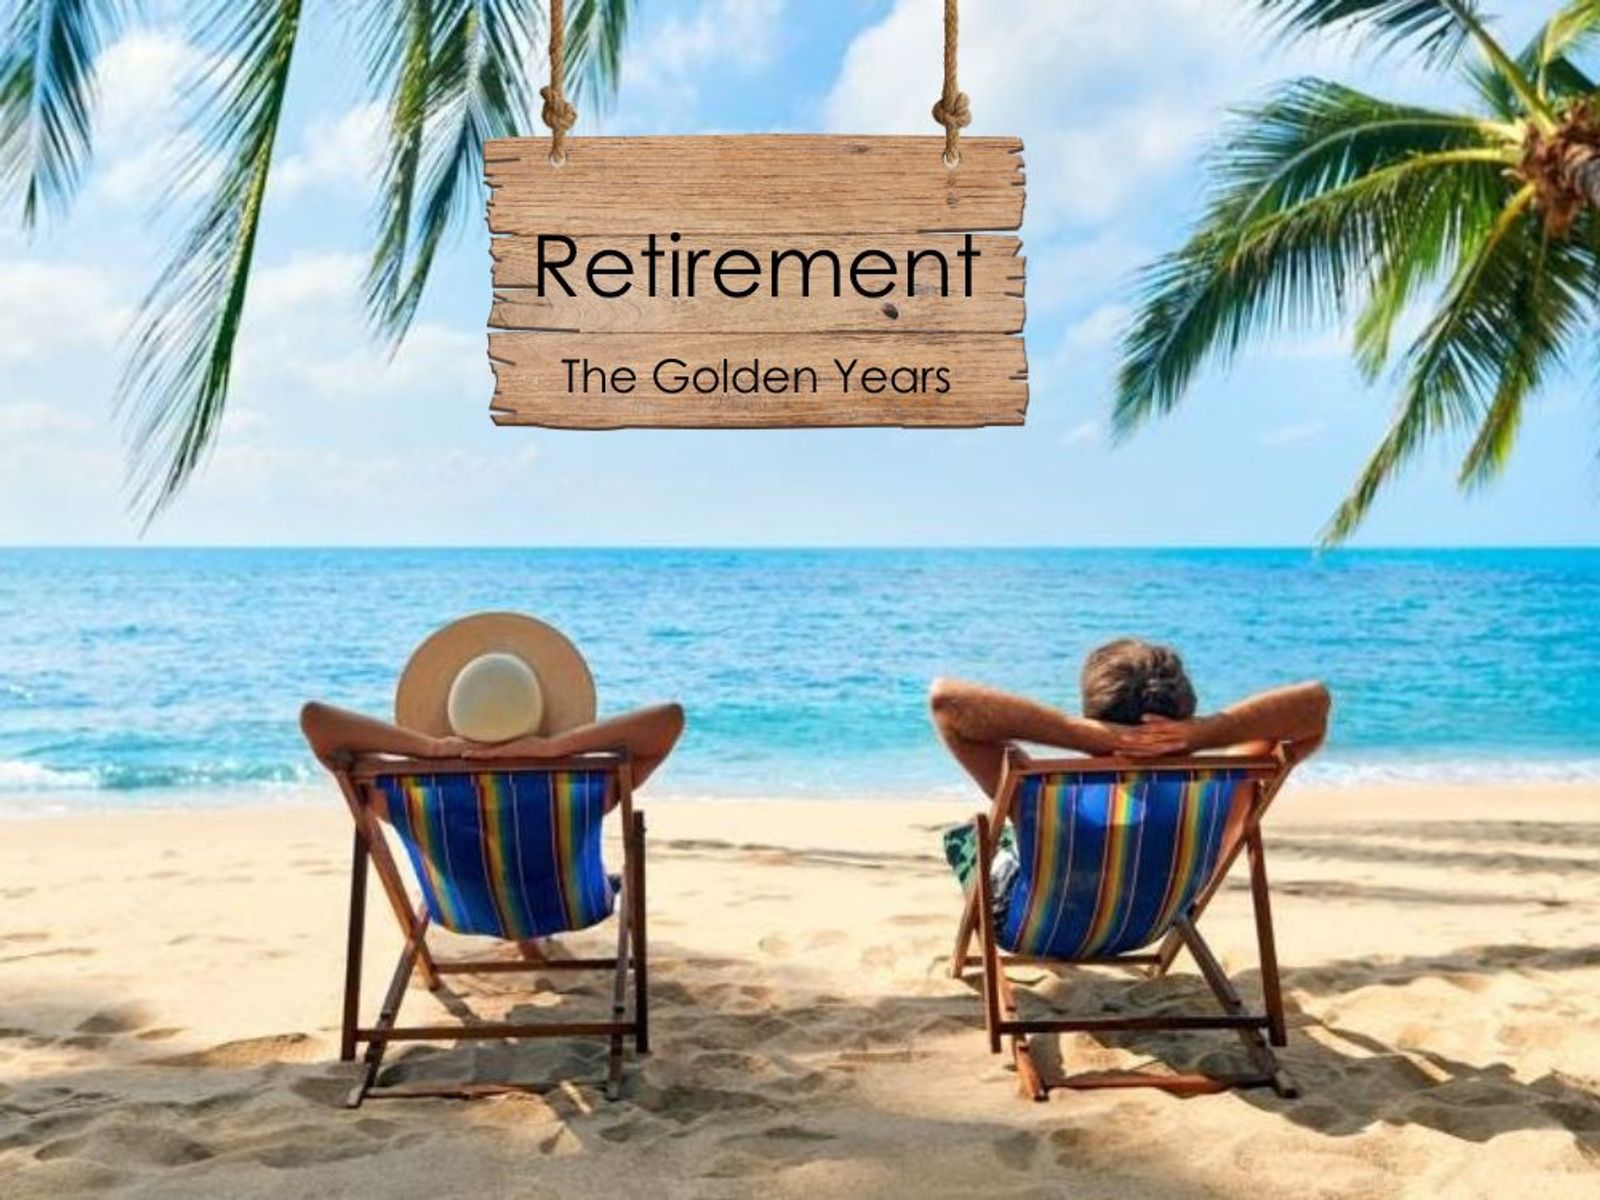 The Golden Years ... downsize your home, upsize your lifestyle!